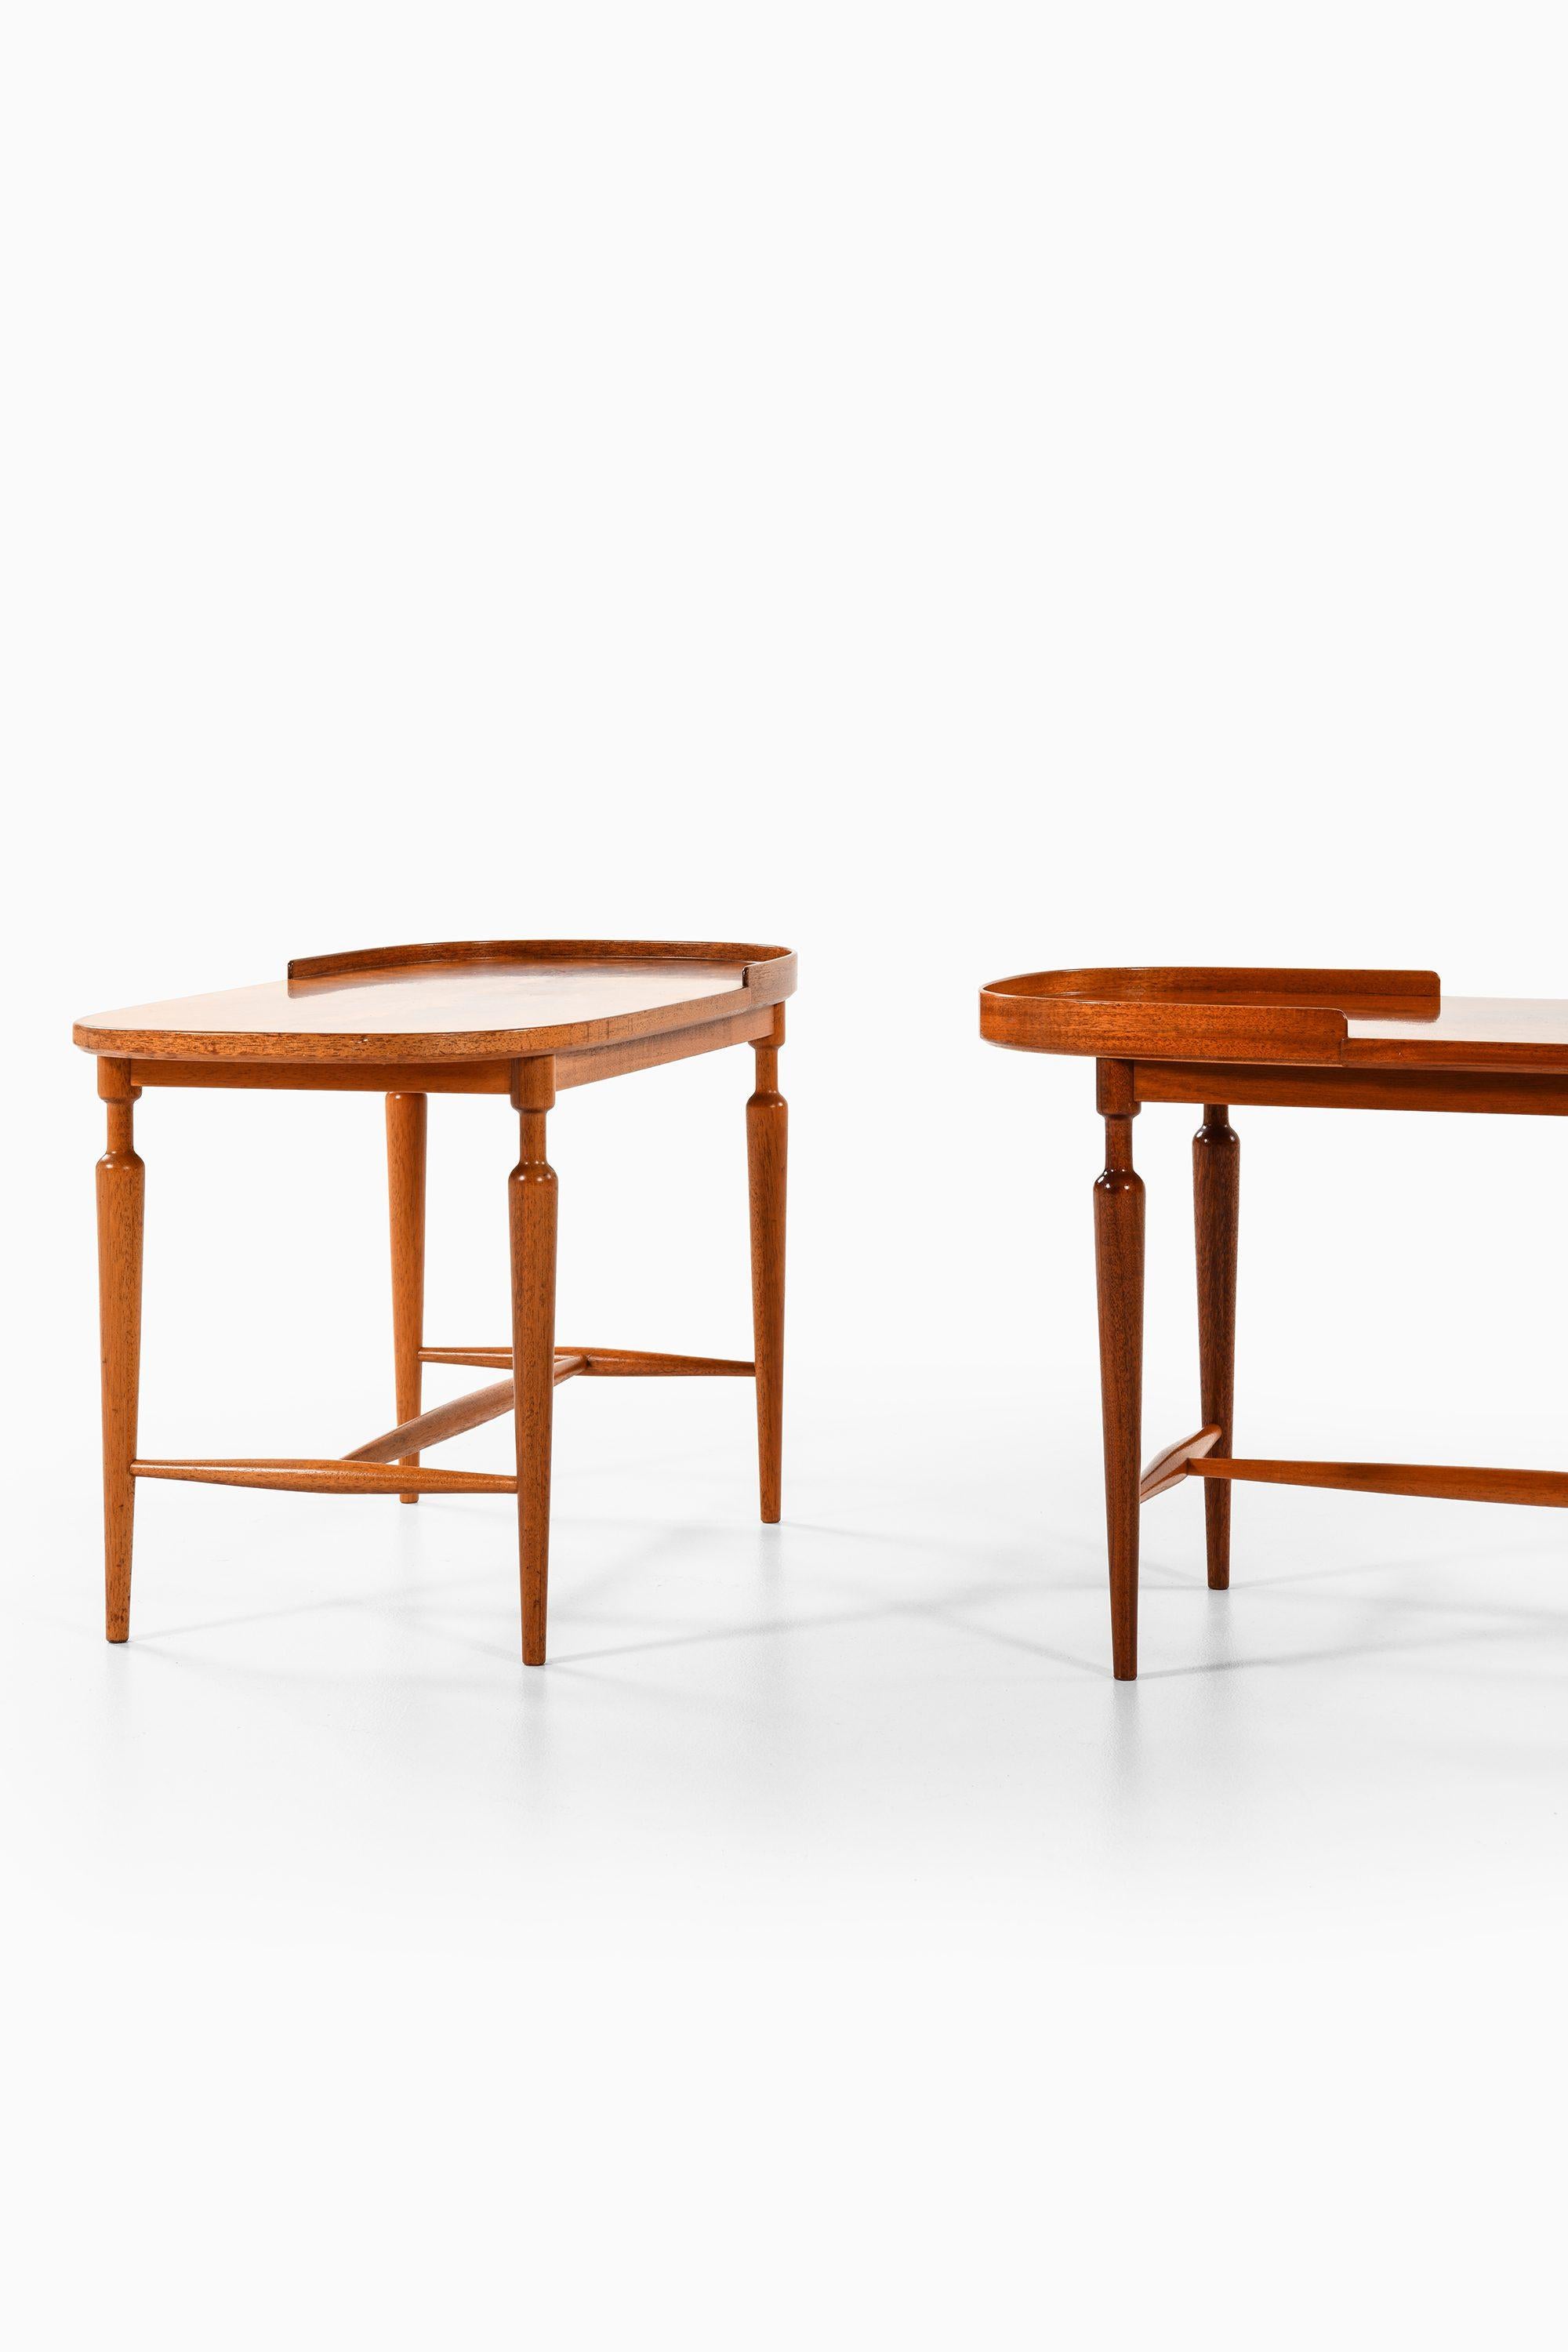 Swedish Pair of Side Table in Mahogany by Josef Frank, 1939 For Sale